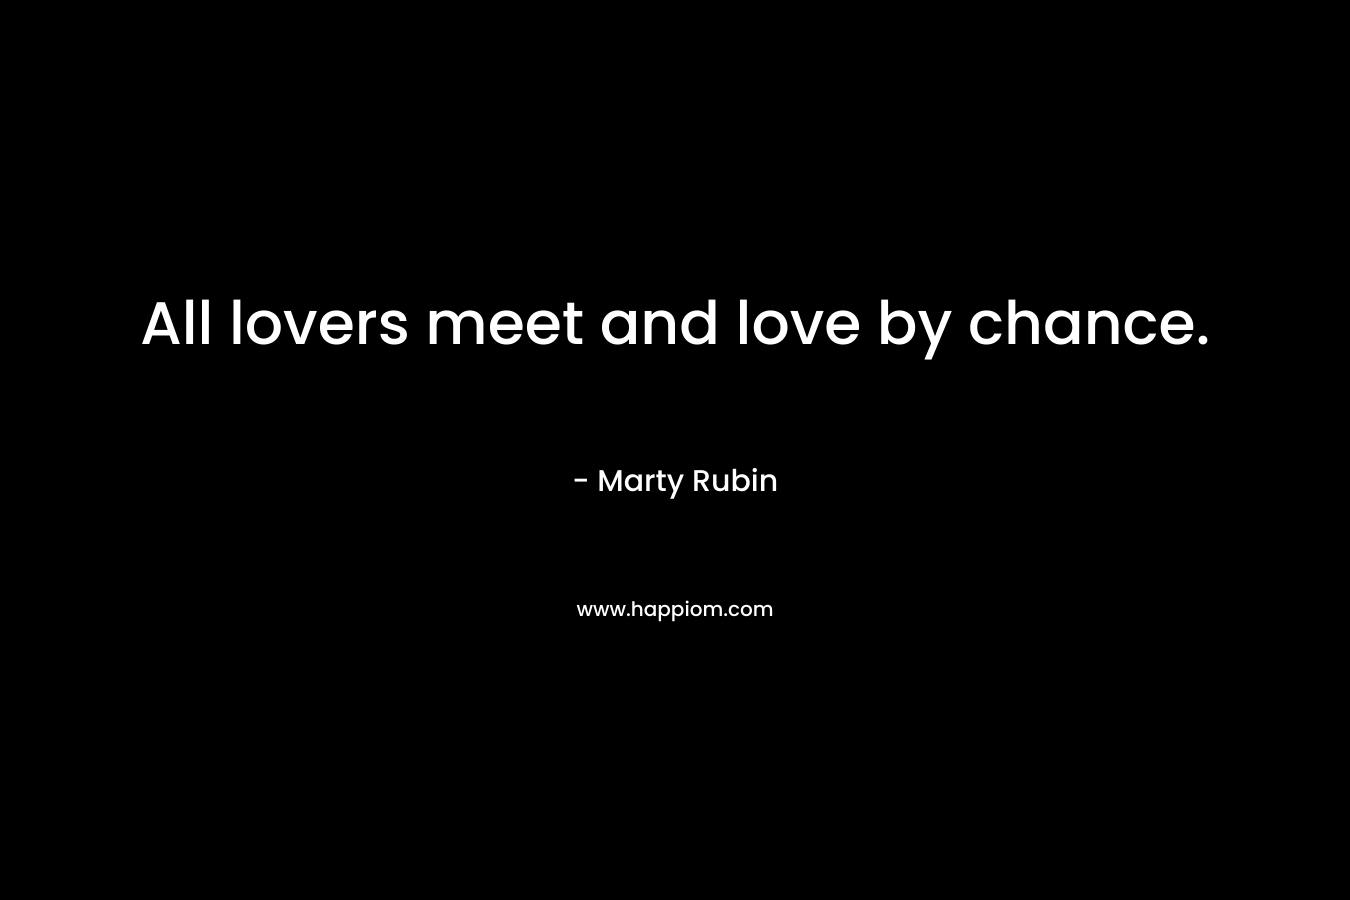 All lovers meet and love by chance.